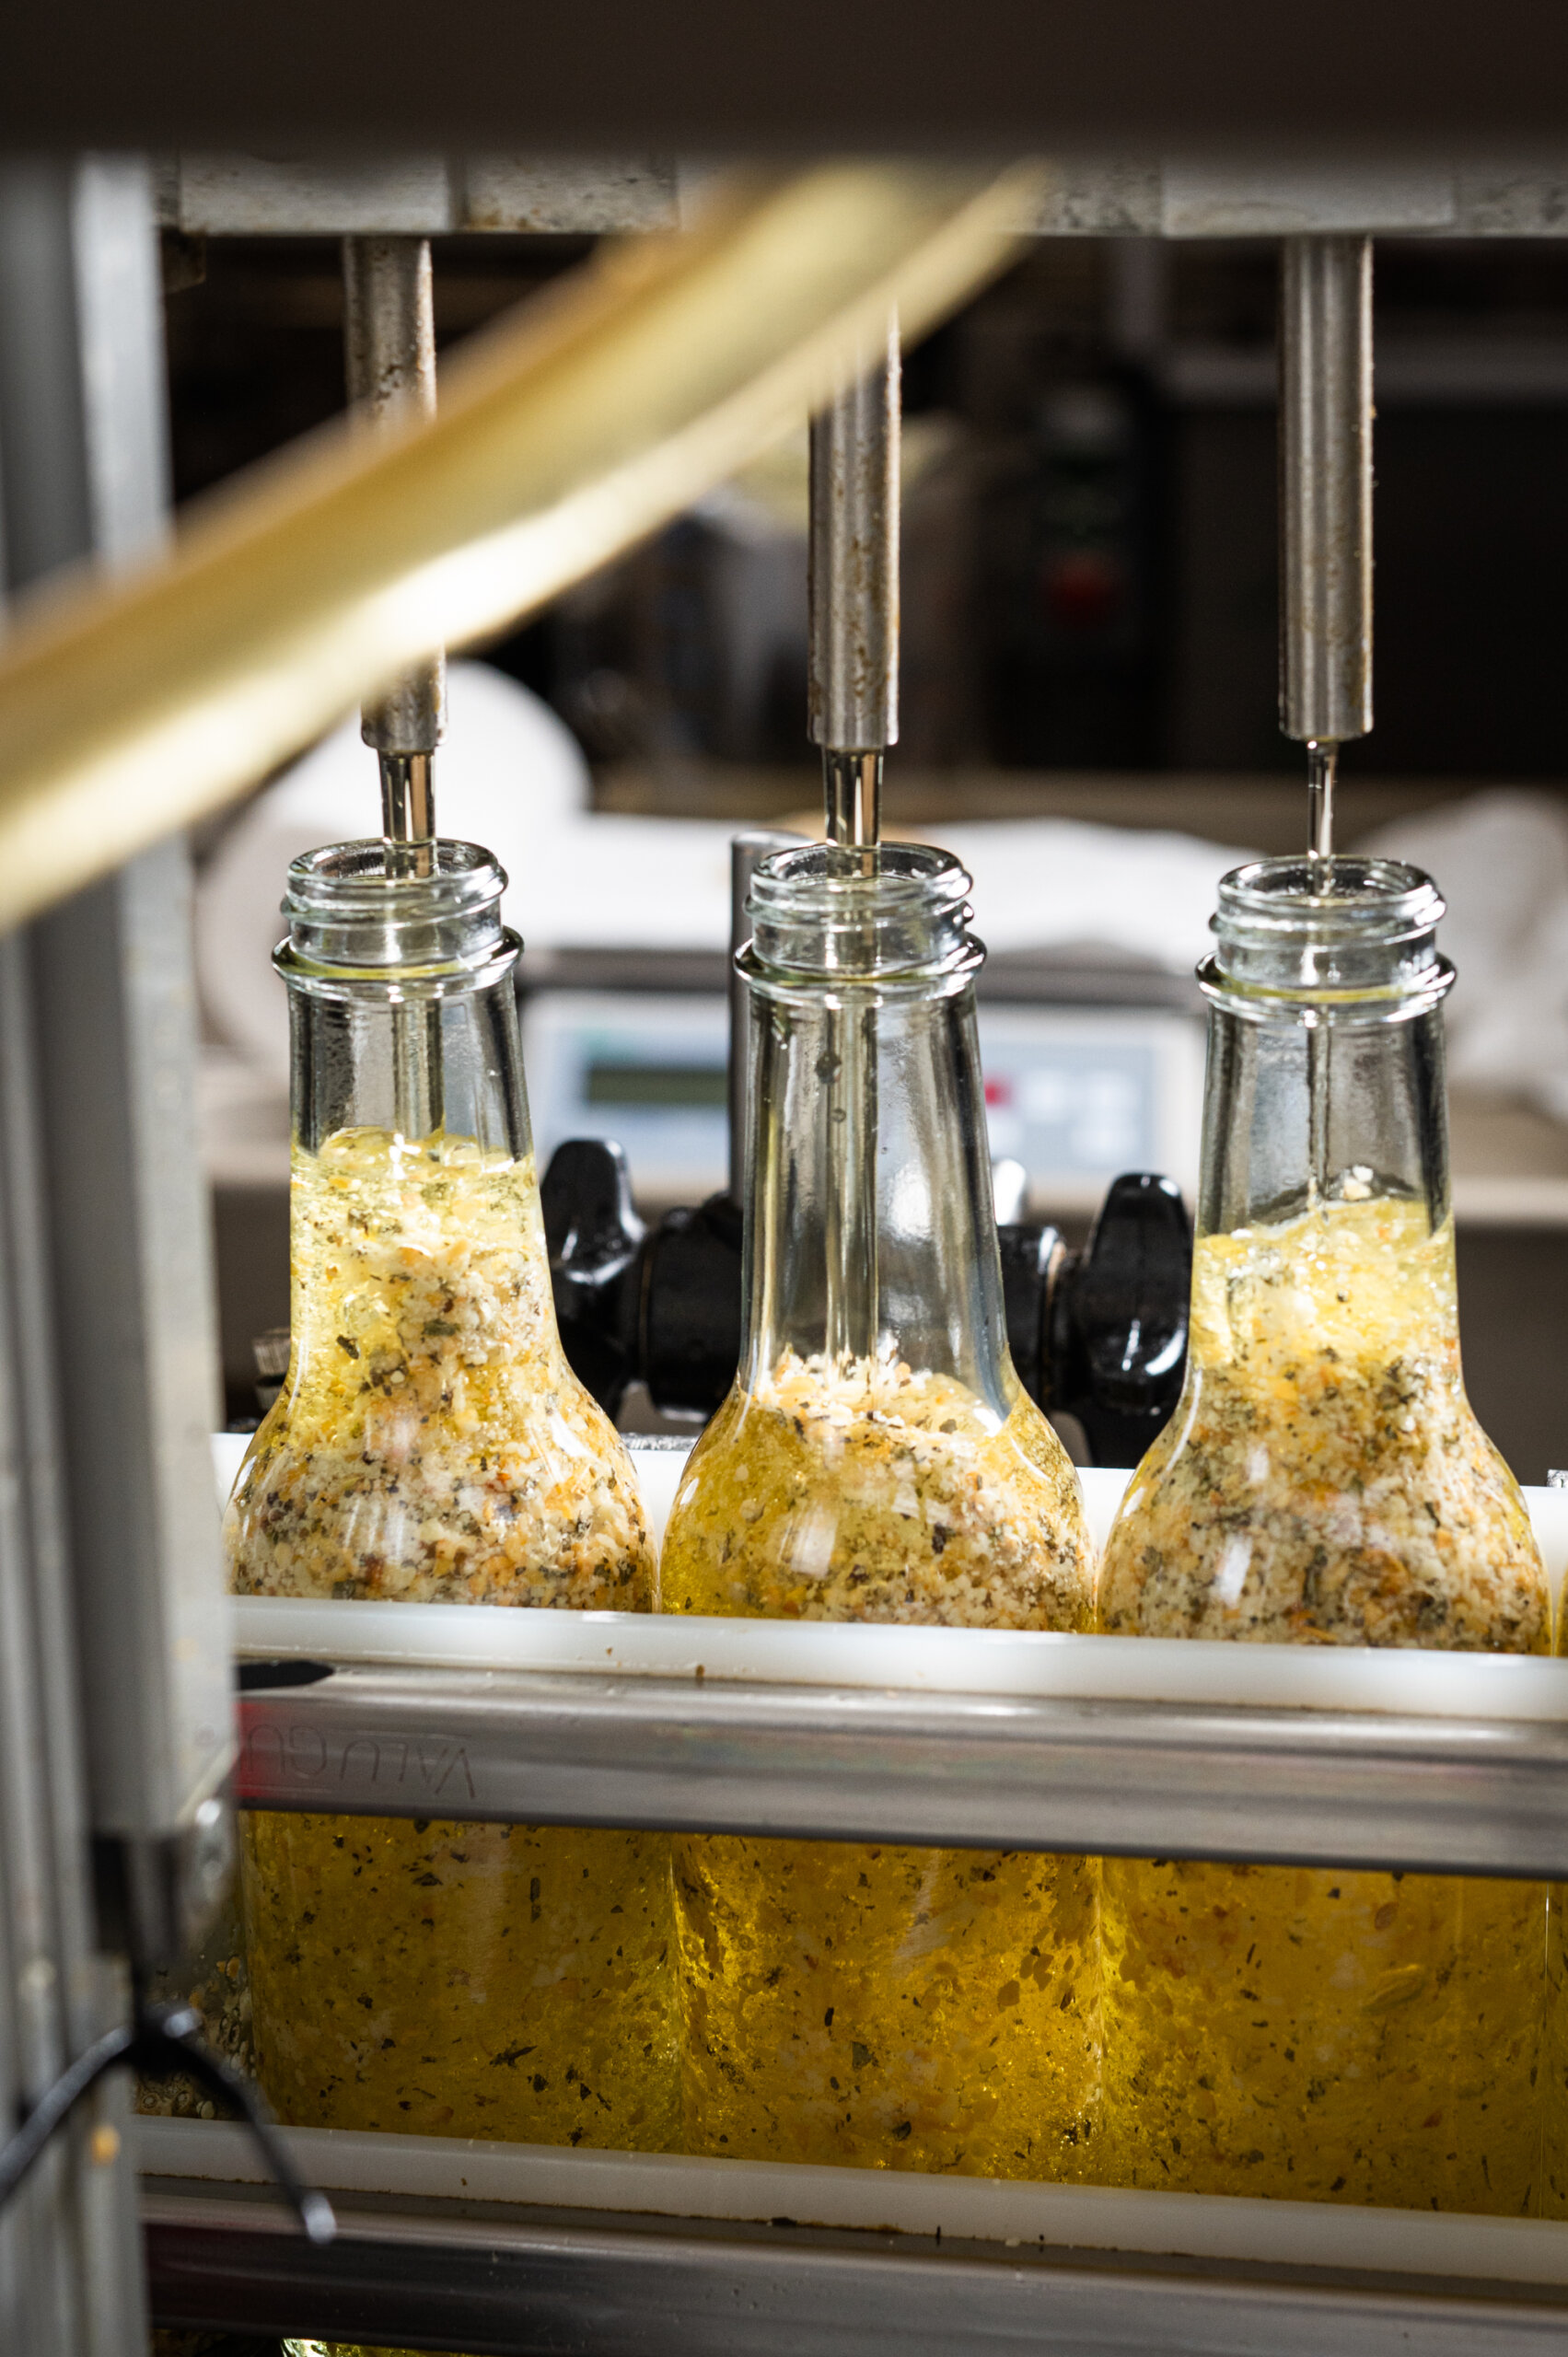 Oil is injected into bottles filled with parmesan and herbs